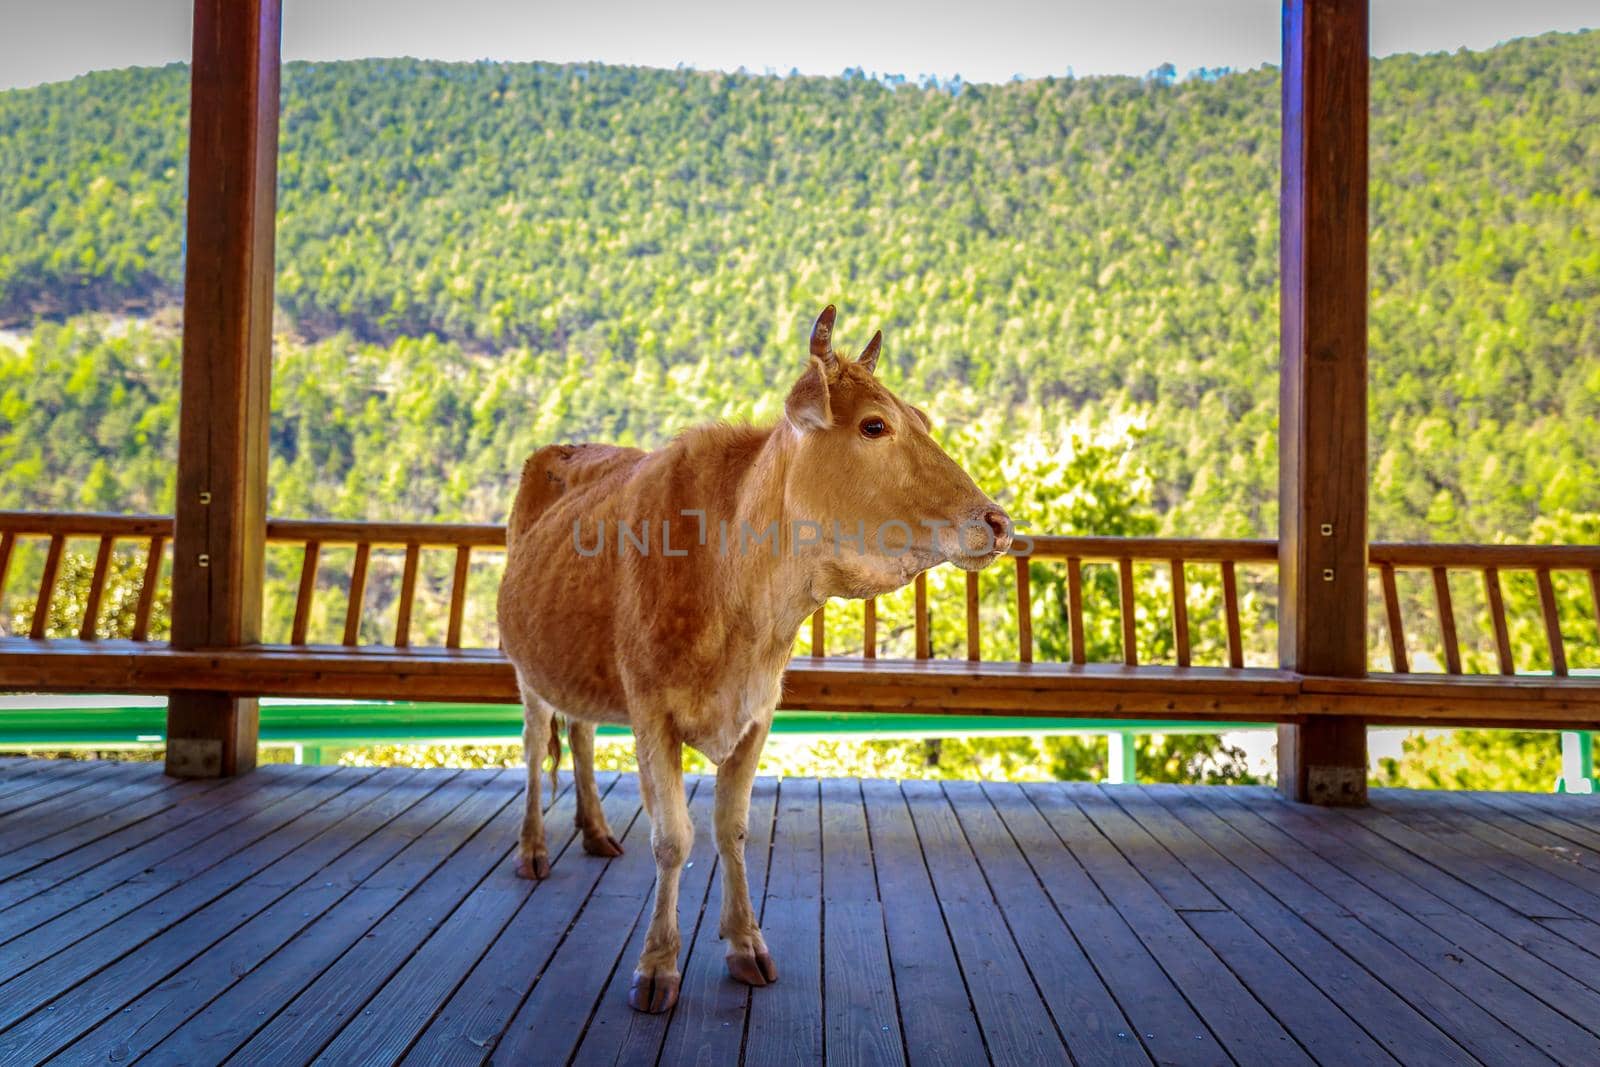 Cow in Cool Shade by gepeng